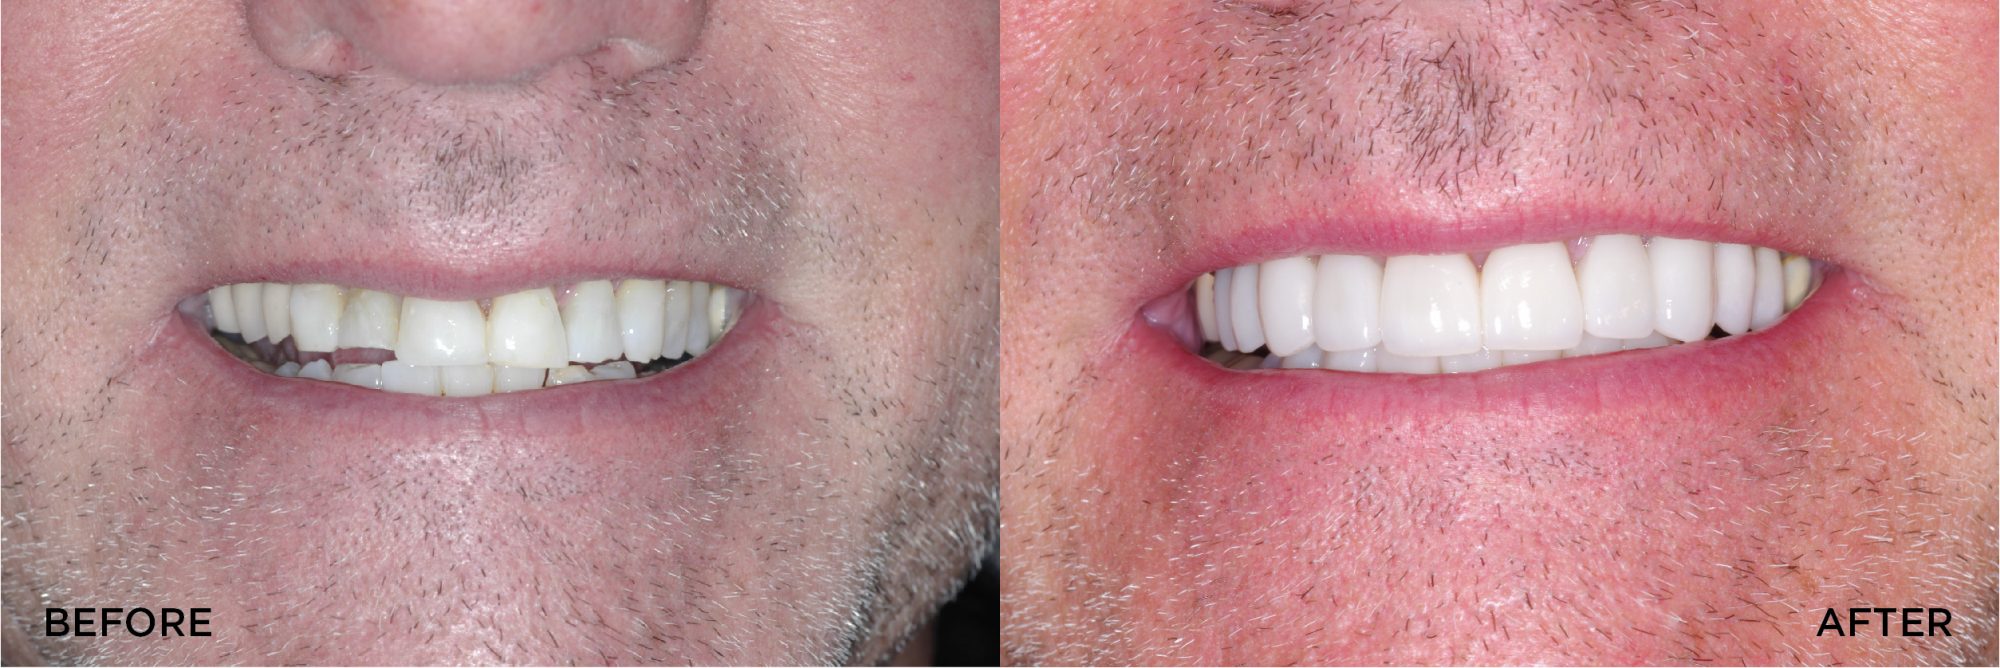 Full Mouth Rehab with Crowns Veneers